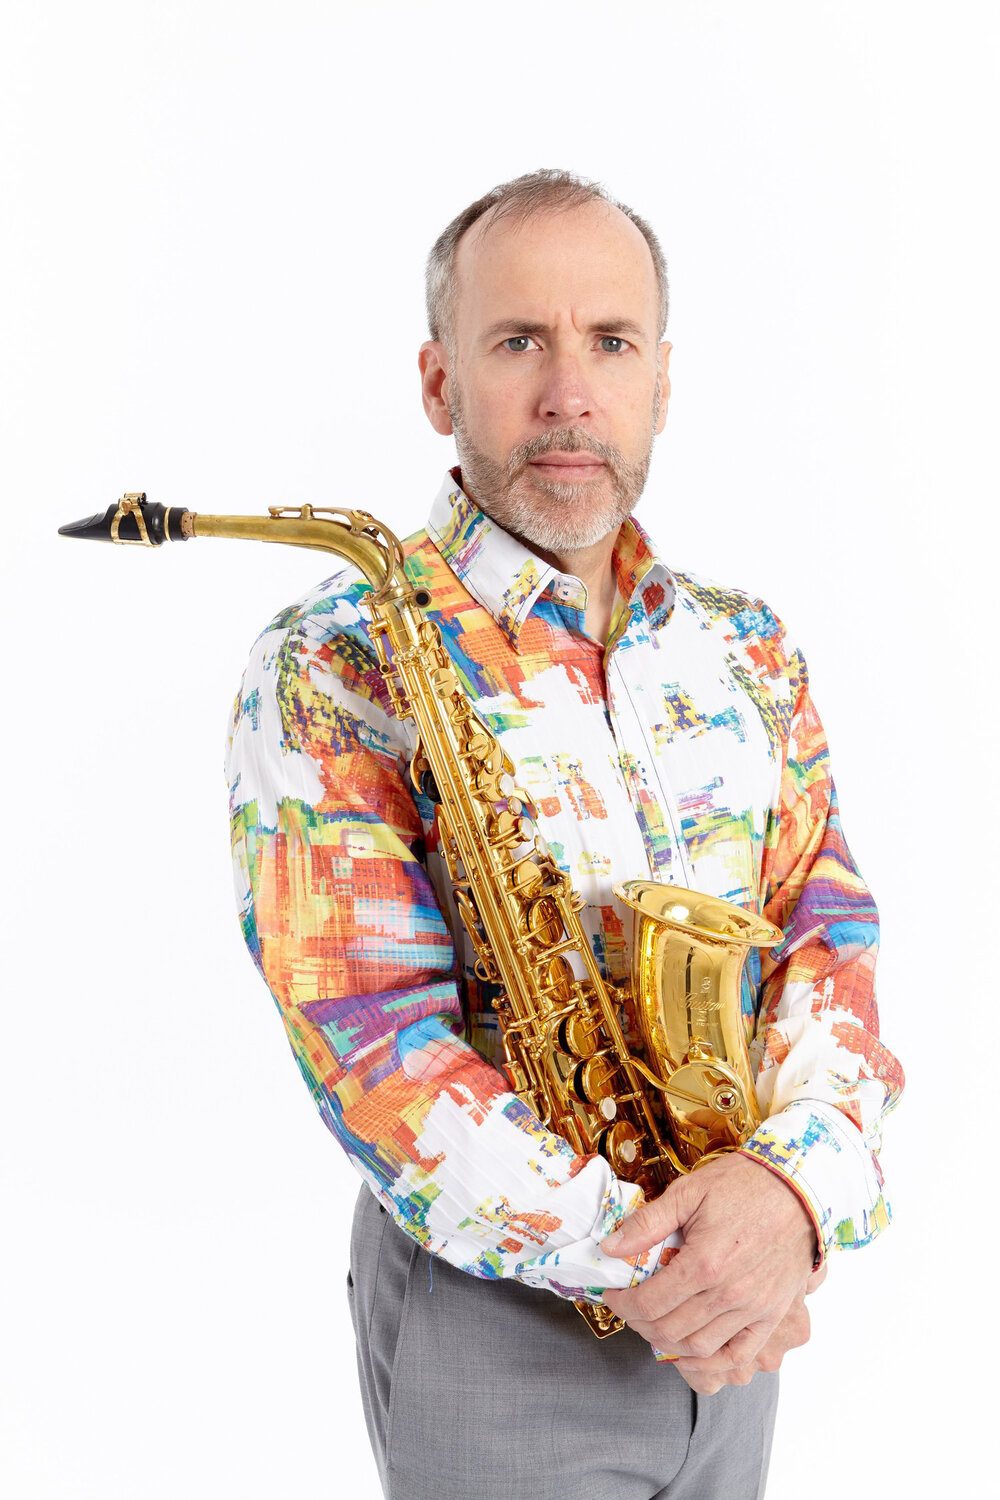 white male with grey short hair holding a brass saxophone in his arms and wearling a white and bright colors shirt